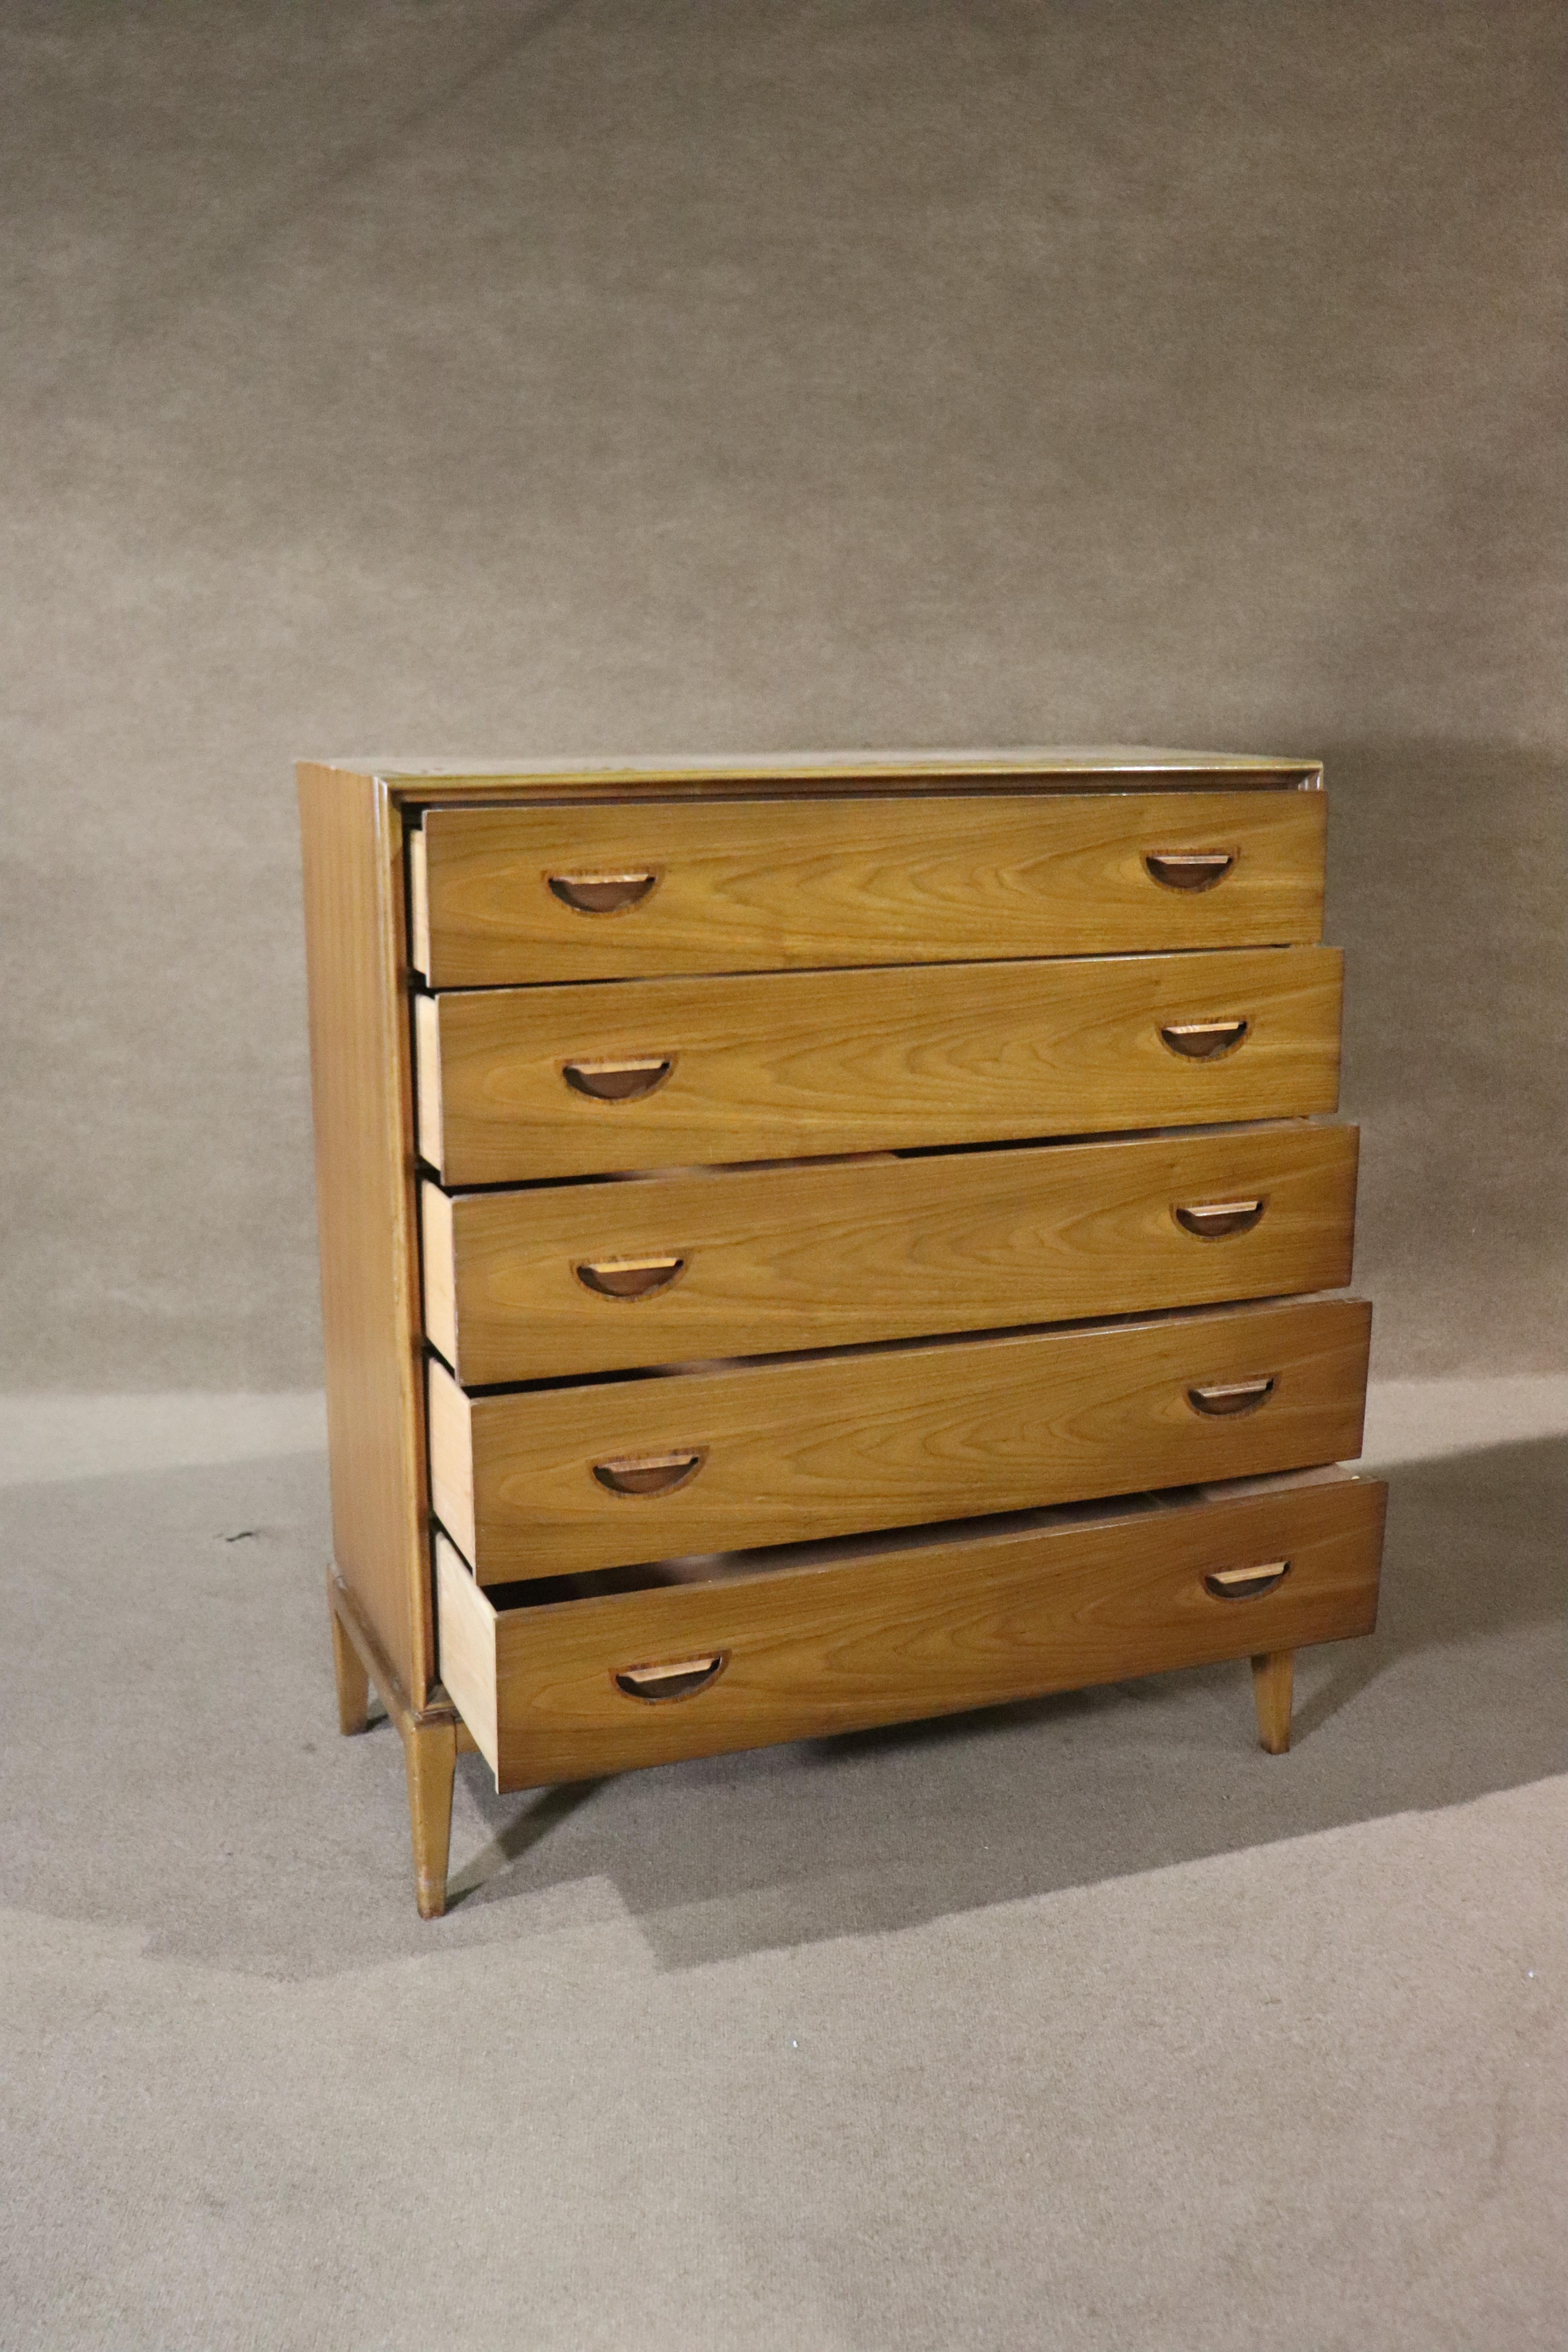 Mid-century modern tall chest of drawers in stunning walnut wood grain with sculpted inset rosewood handles. Five wide drawers set on tapered legs. Very simple but unique vintage design.
Please confirm location NY or NJ